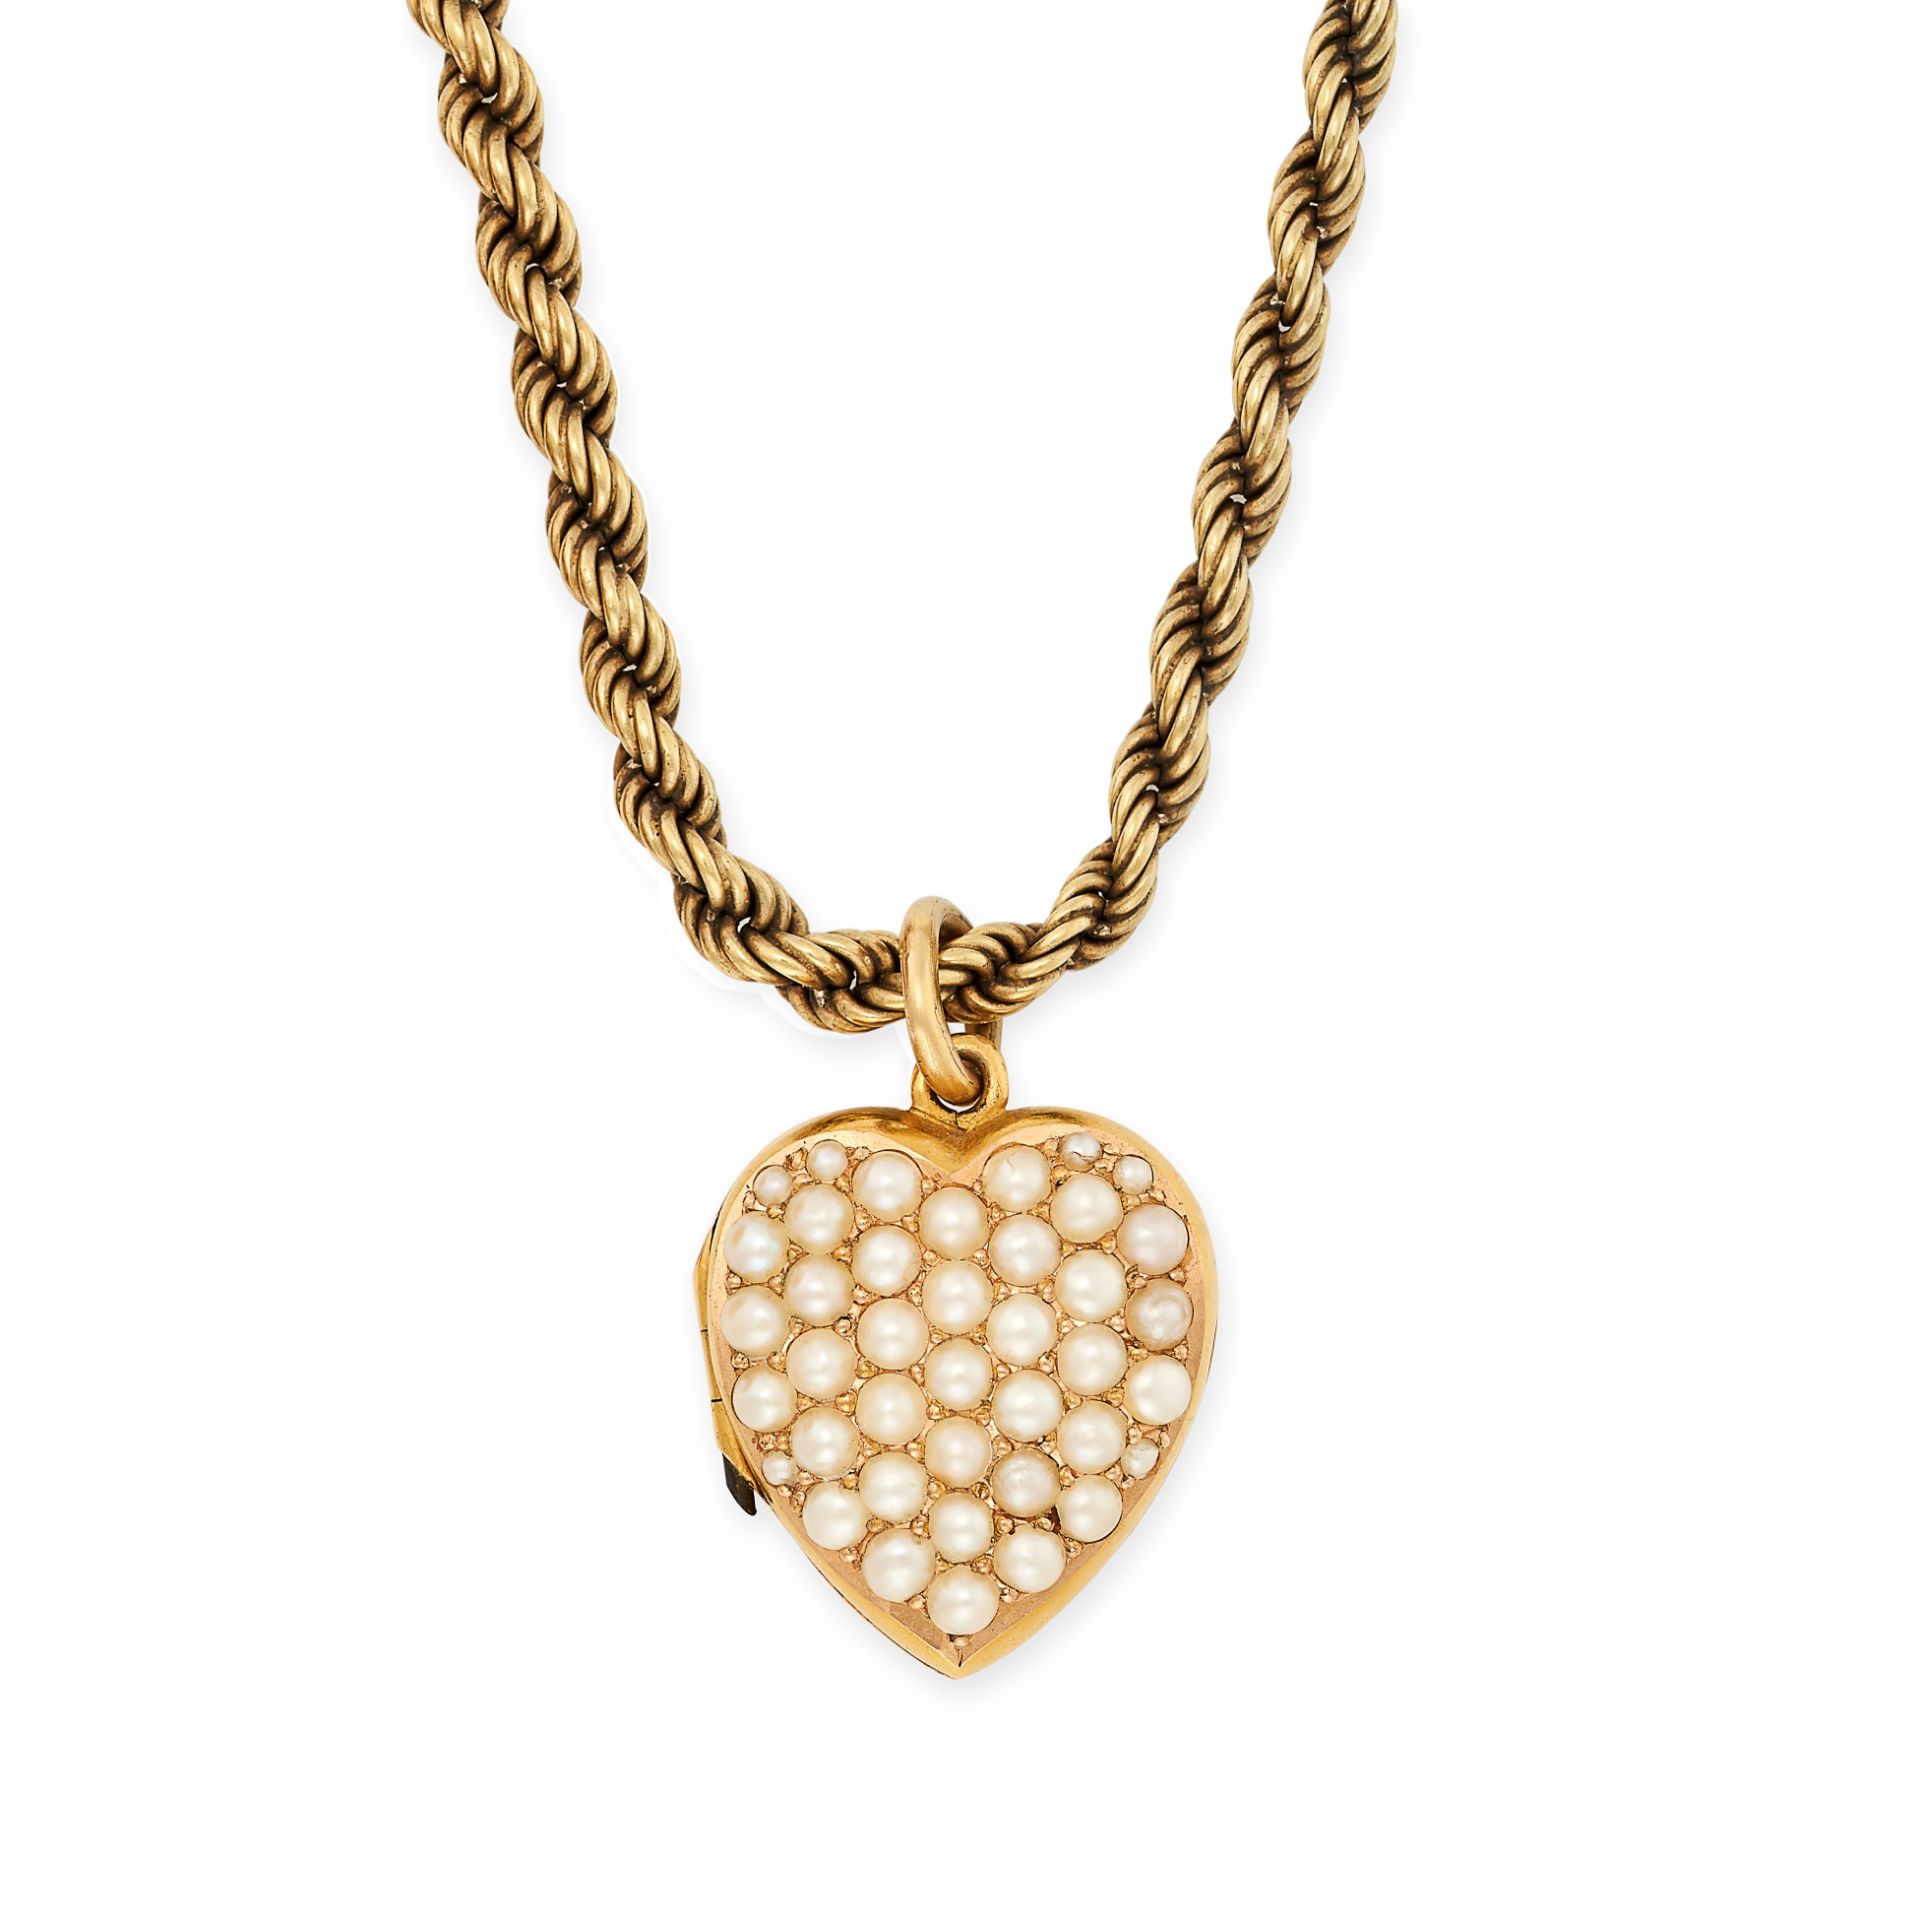 AN ANTIQUE PEARL HEART LOCKET PENDANT AND CHAIN in yellow gold, the heart shaped locket set with